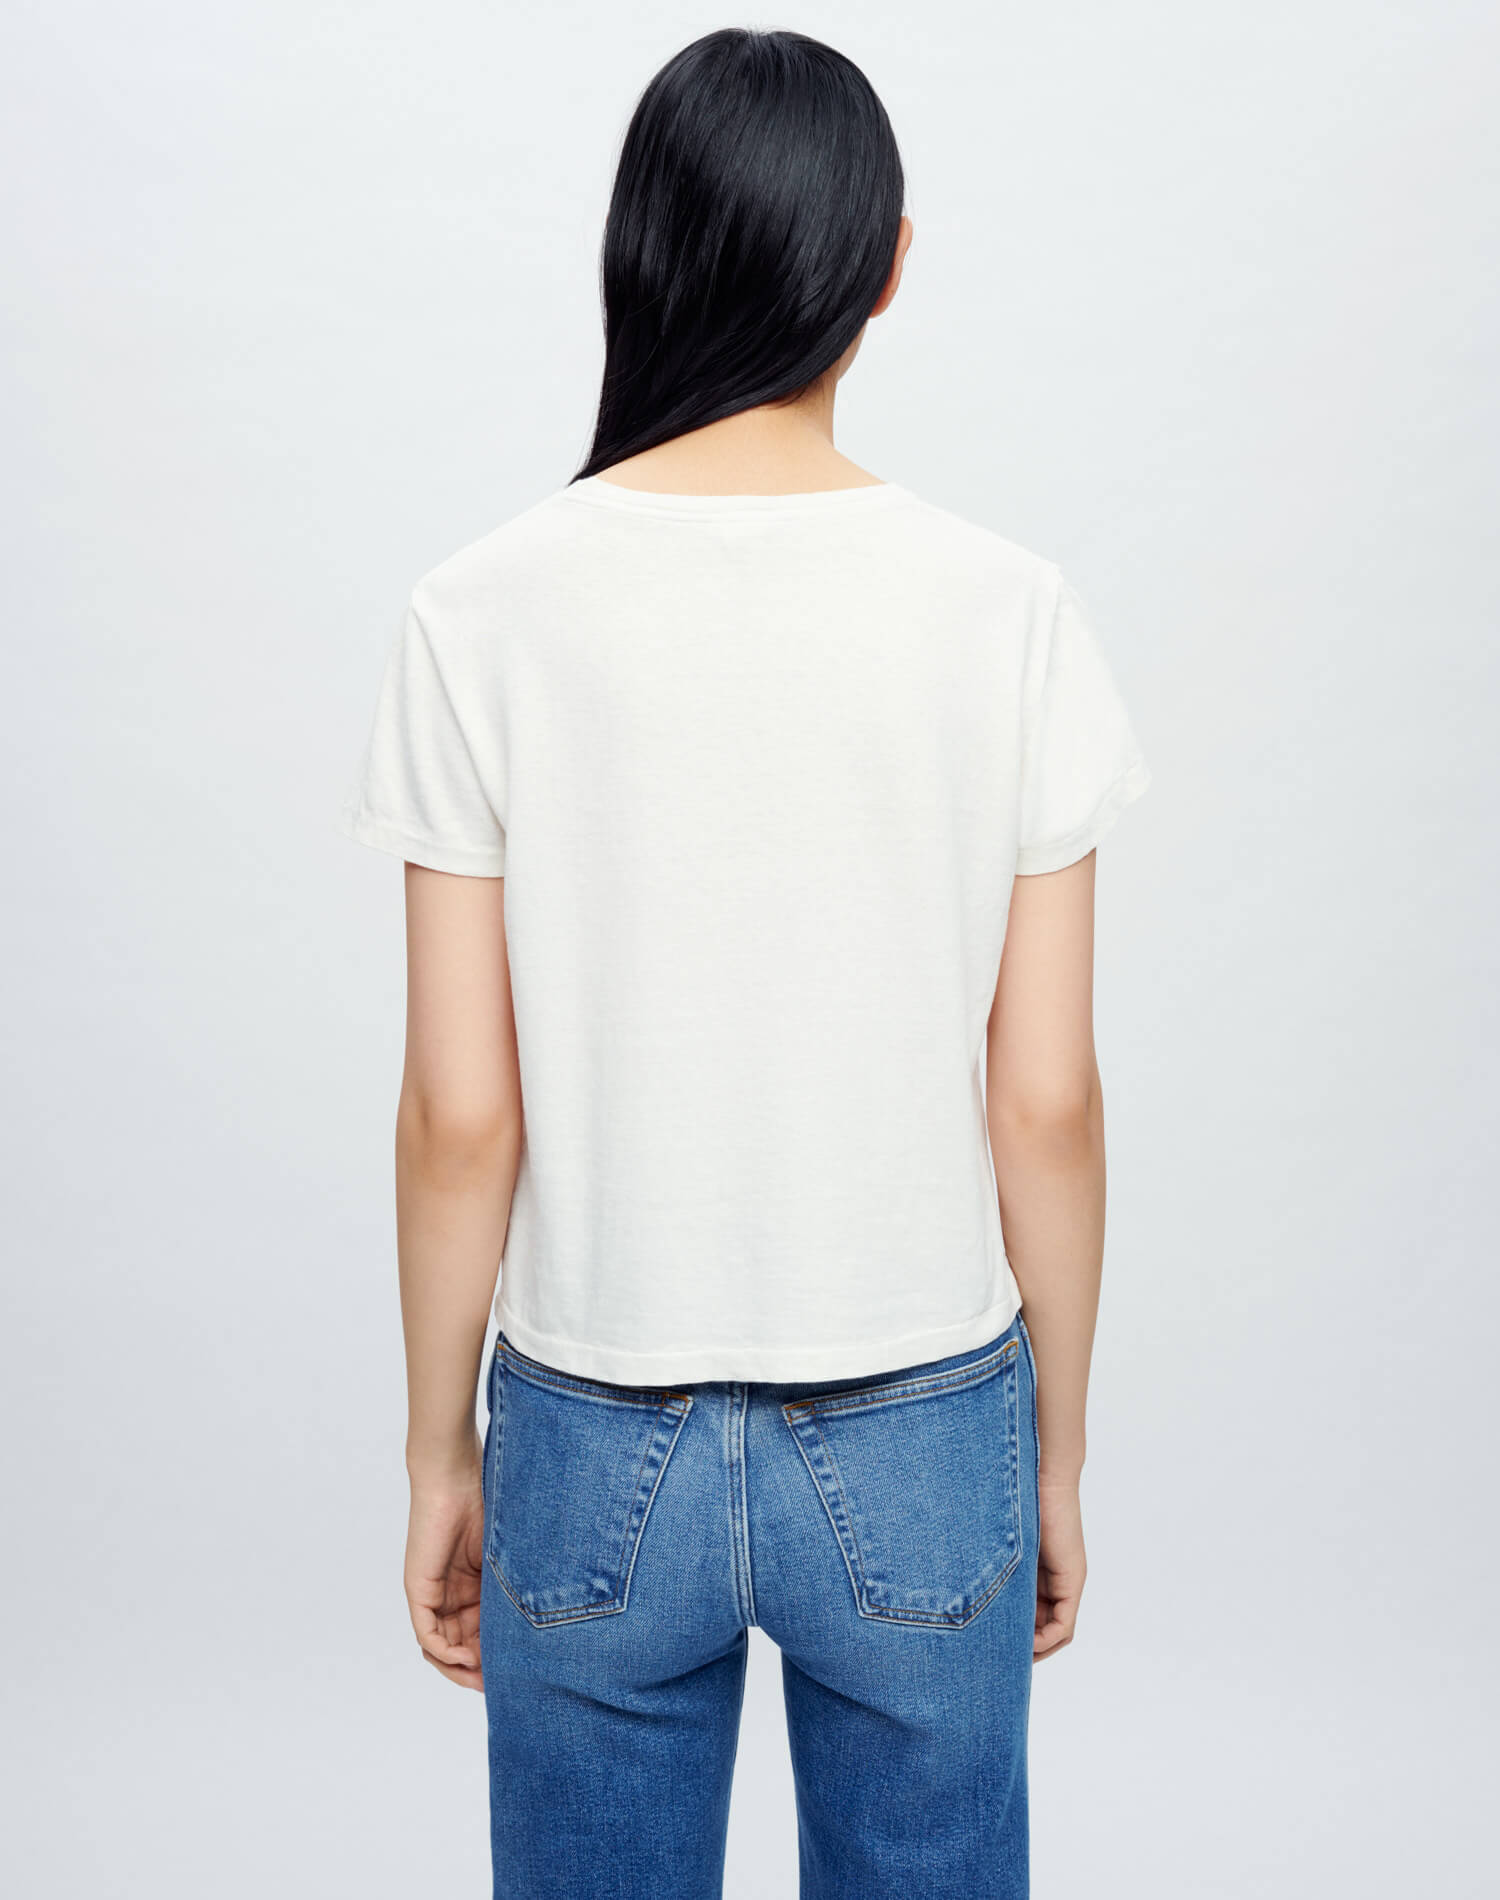 Classic Tee "Lucy Cute" - Vintage White